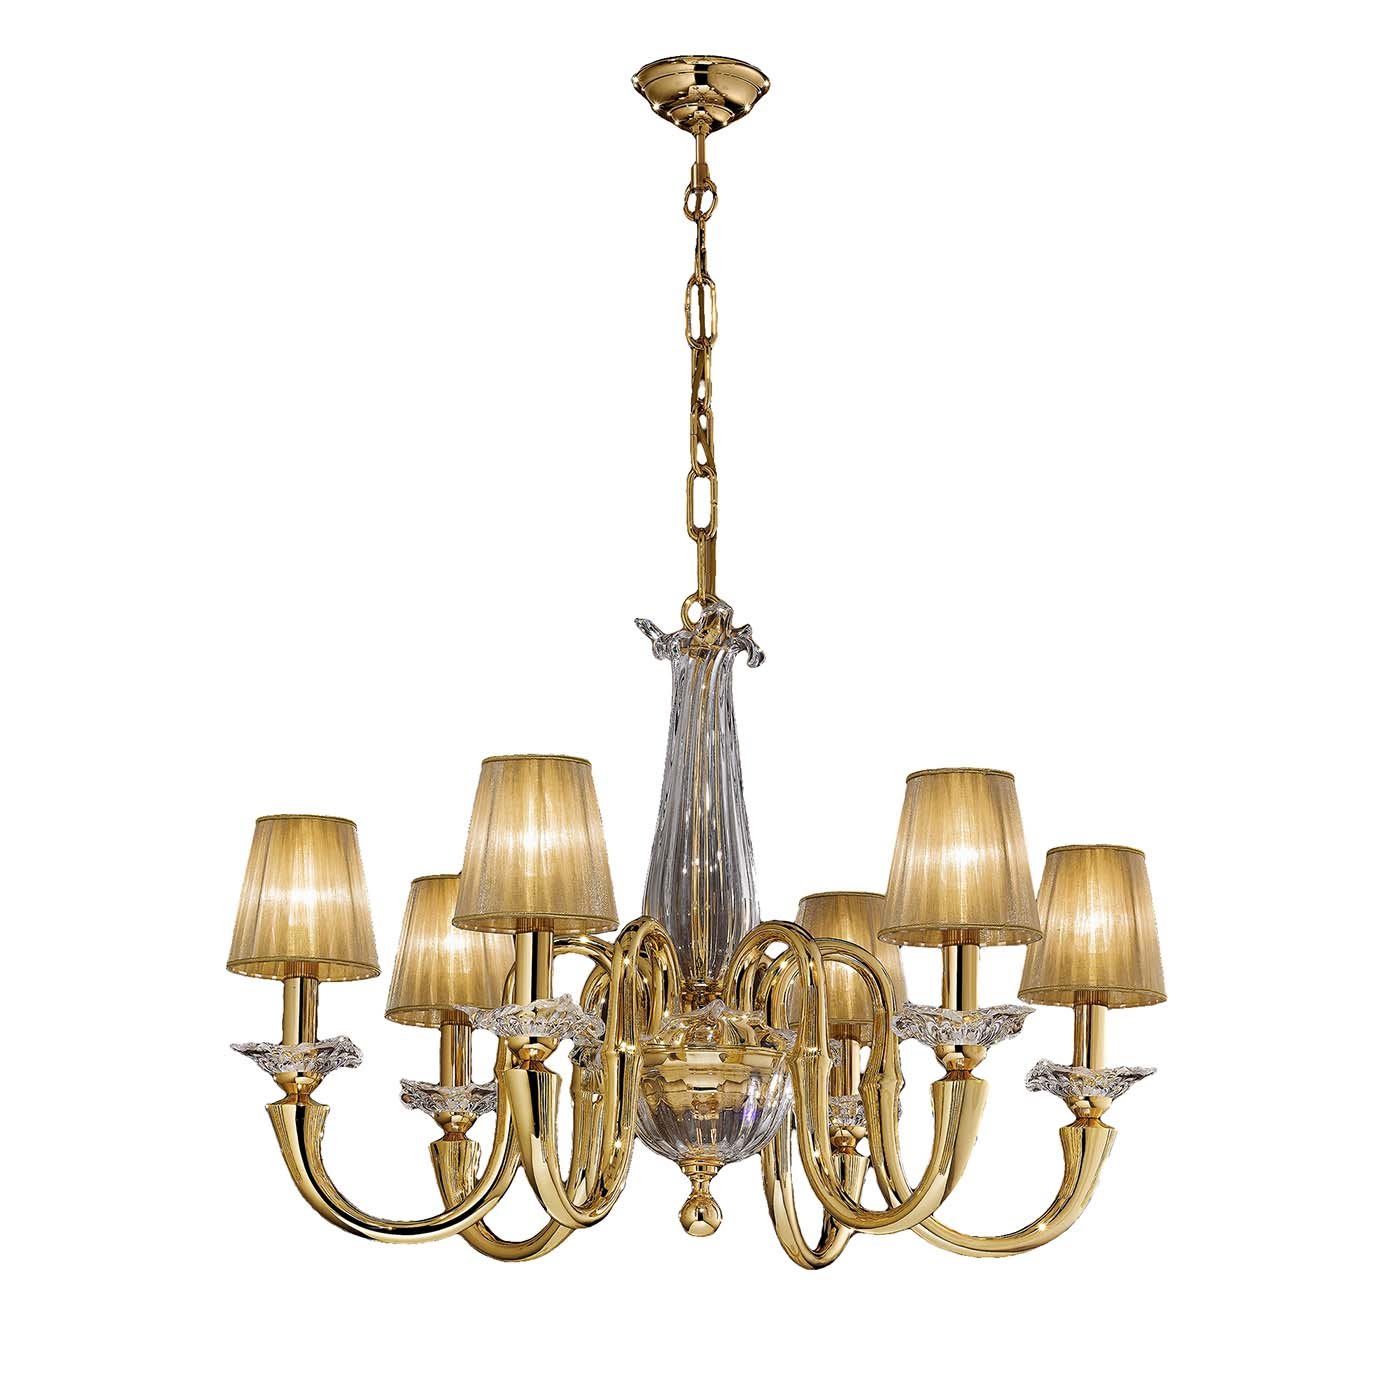 Gold and Crystal 6-Light Chandelier with Organza Shades - Possoni Illuminazione